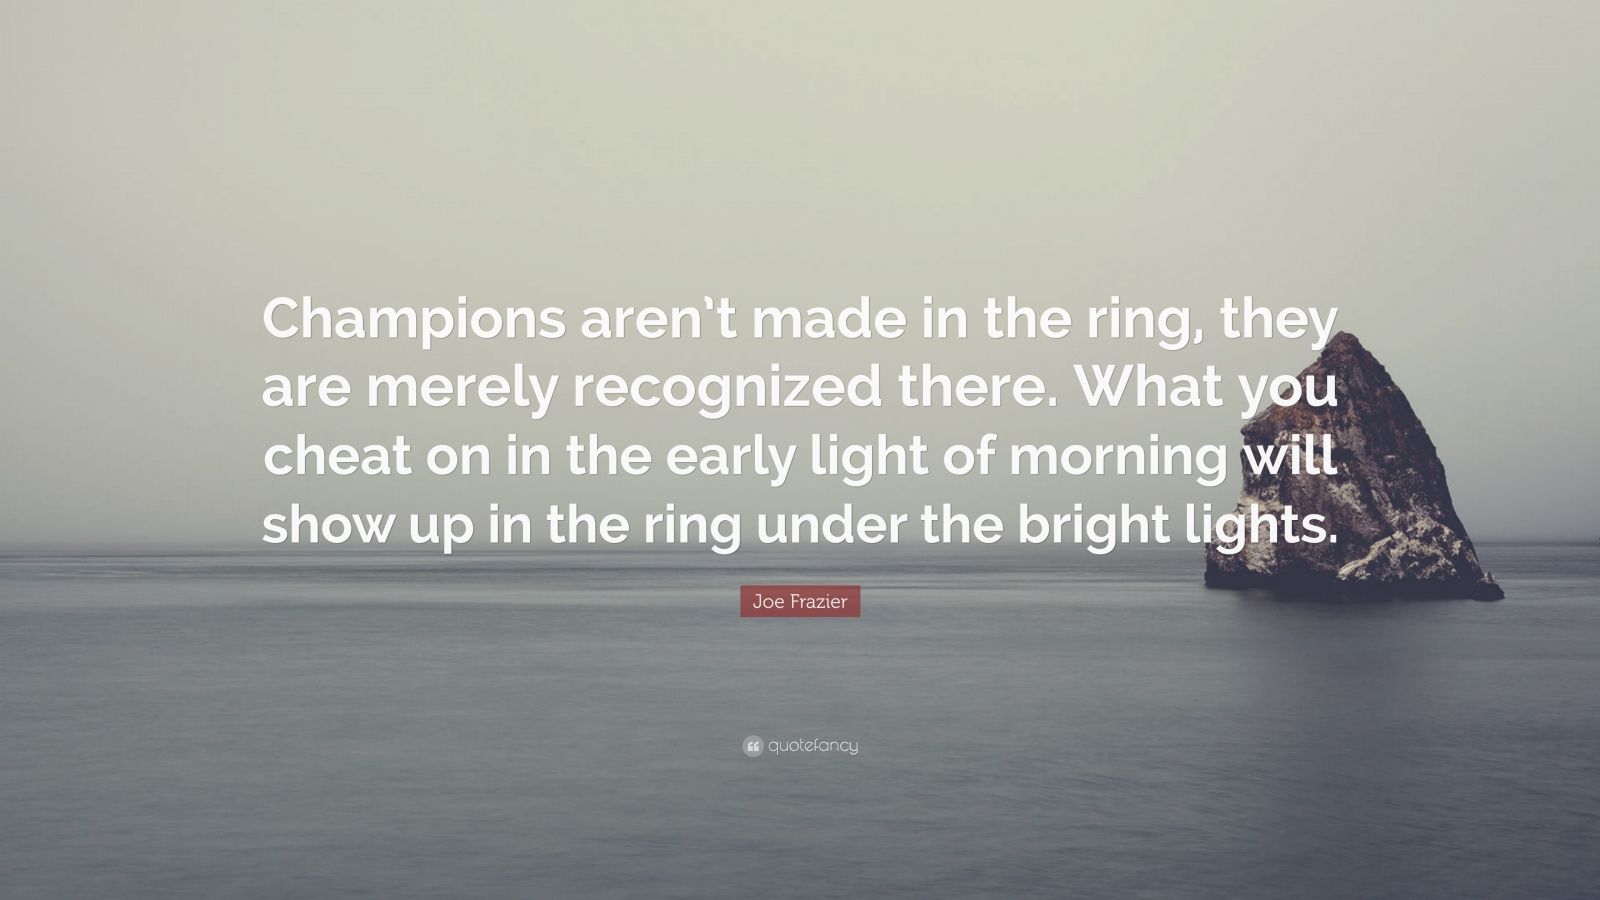 Joe Frazier Quote: “Champions aren’t made in the ring ... - 1600 x 900 jpeg 92kB